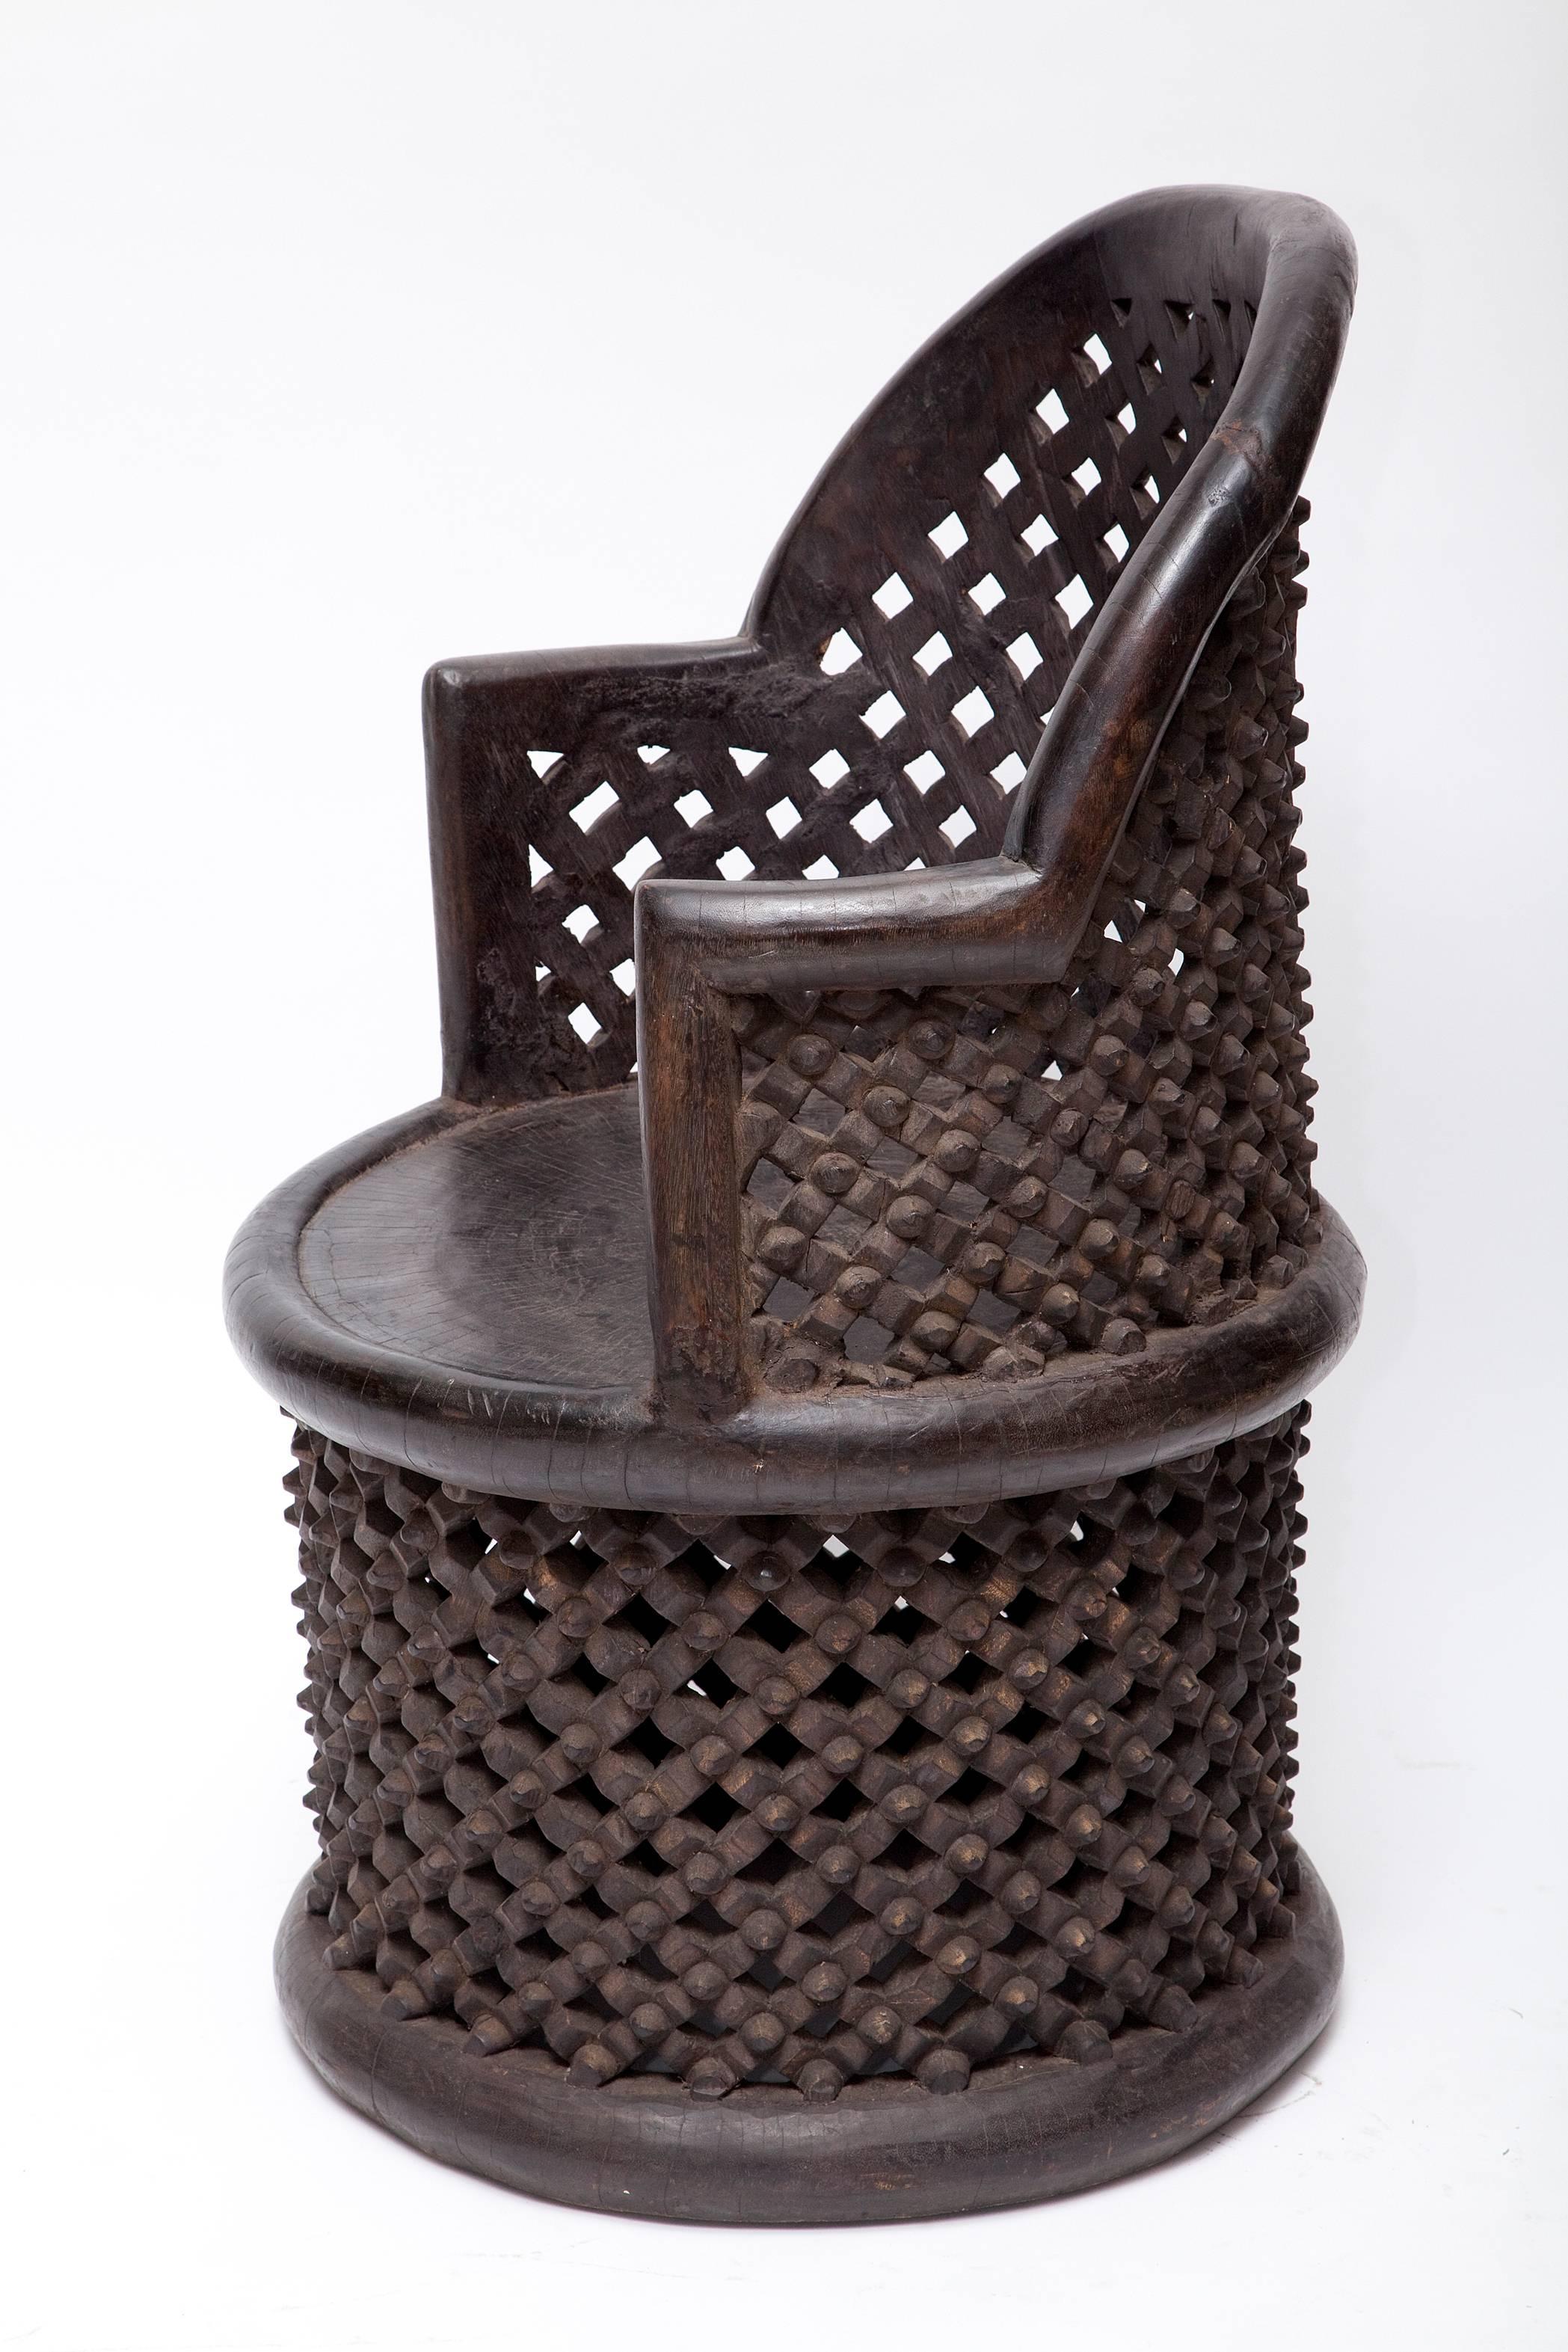 Hand-Carved Bamileke Hand Carved Wood Tribal Chair - One Left!